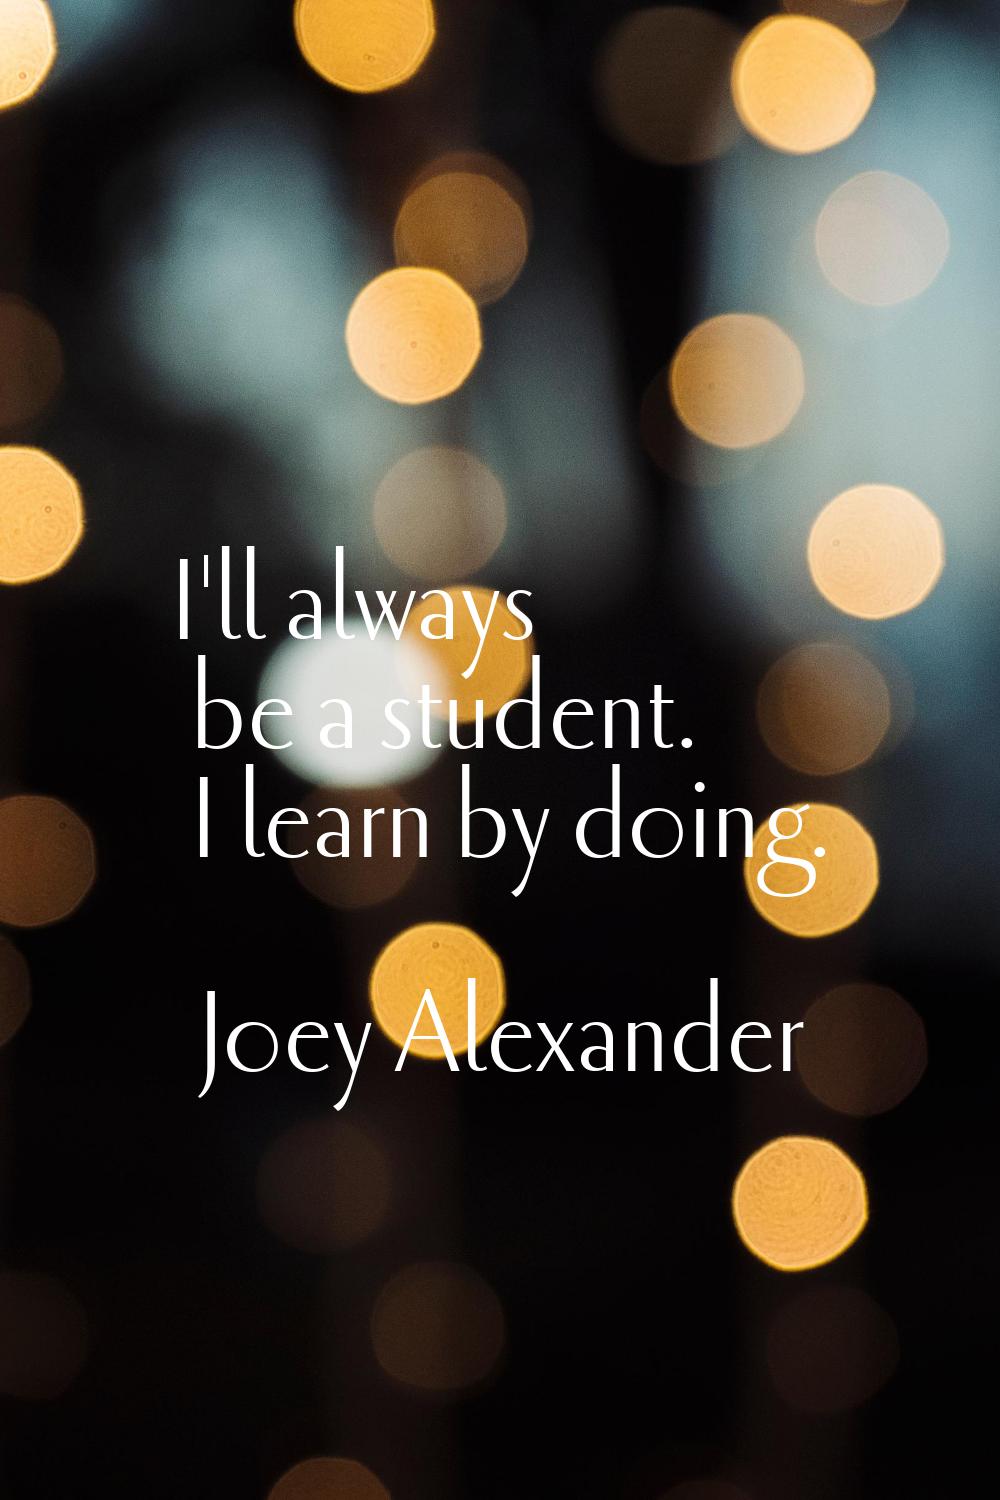 I'll always be a student. I learn by doing.